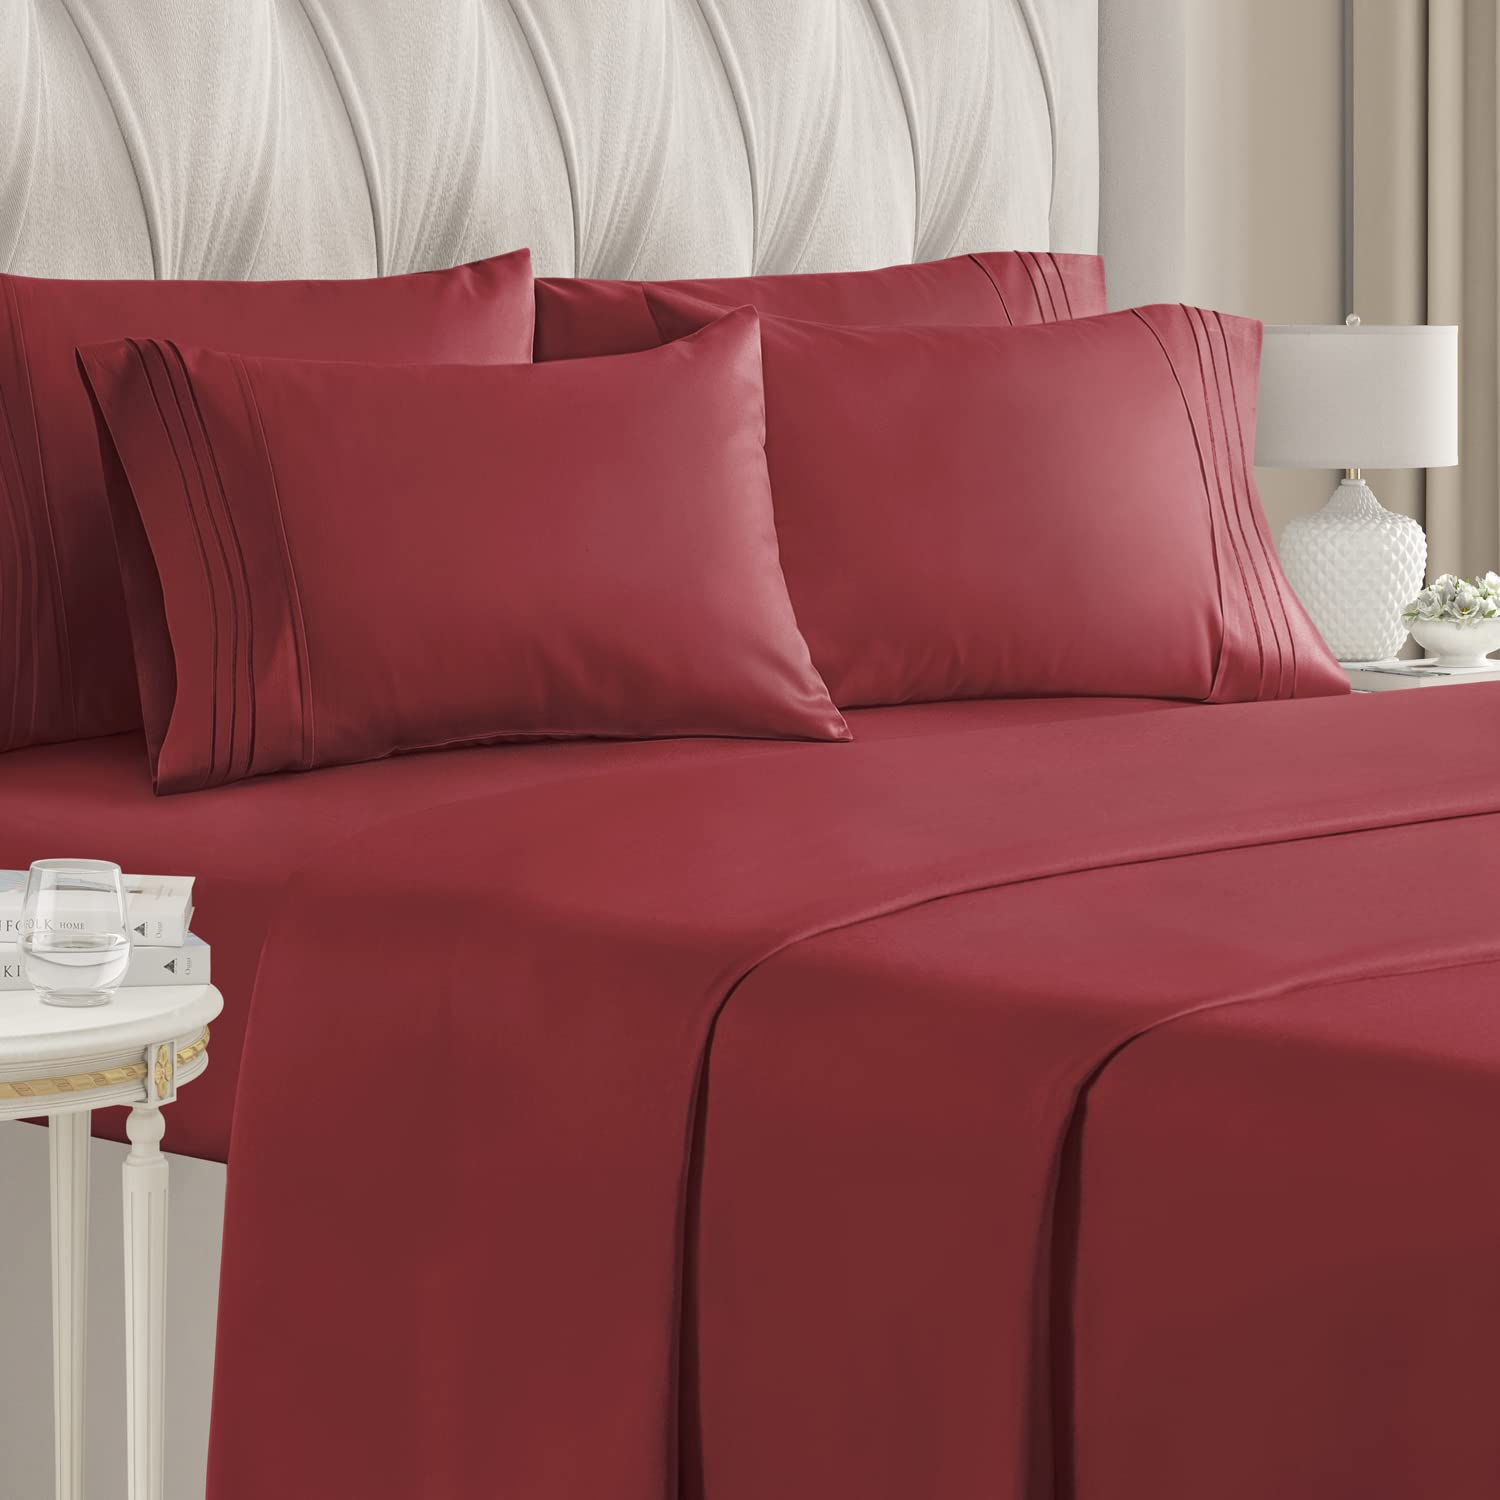 Book Cover Full Size Sheet Set - 6 Piece Set - Hotel Luxury Bed Sheets - Extra Soft - Deep Pockets - Easy Fit - Breathable & Cooling Sheets - Wrinkle Free - Comfy - Burgundy Bed Sheets - Fulls Sheets - 6 PC 16 - Burgundy Full